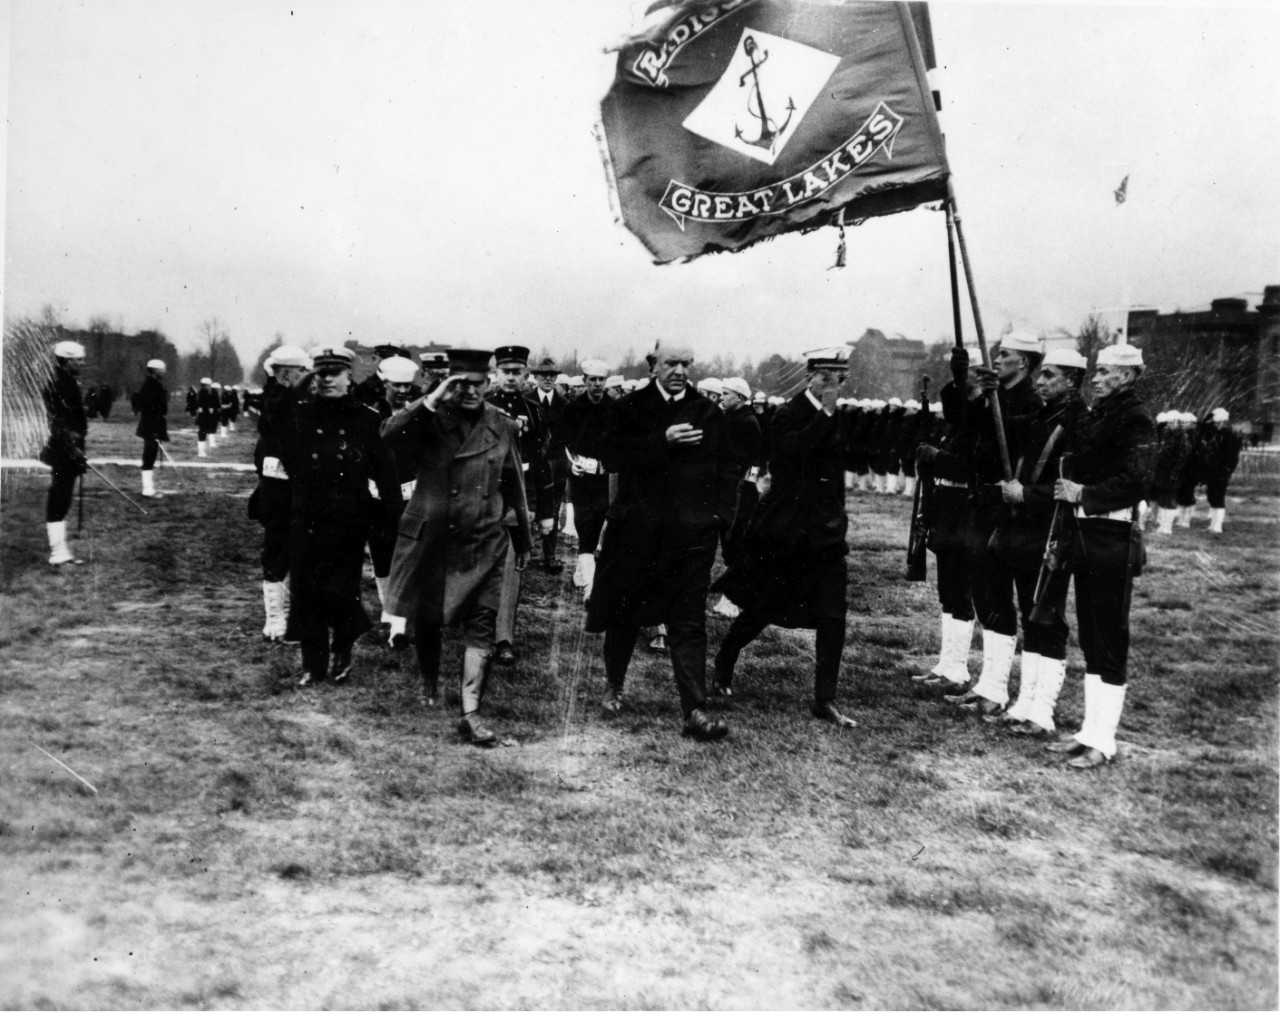 MGen John A. Lejeune, SecNav Edwin Denby, and CAPT William A. Moffett inspect sailors at NTC Great Lakes, IL circa early 1920s. Note flag of the radio school at the right. 